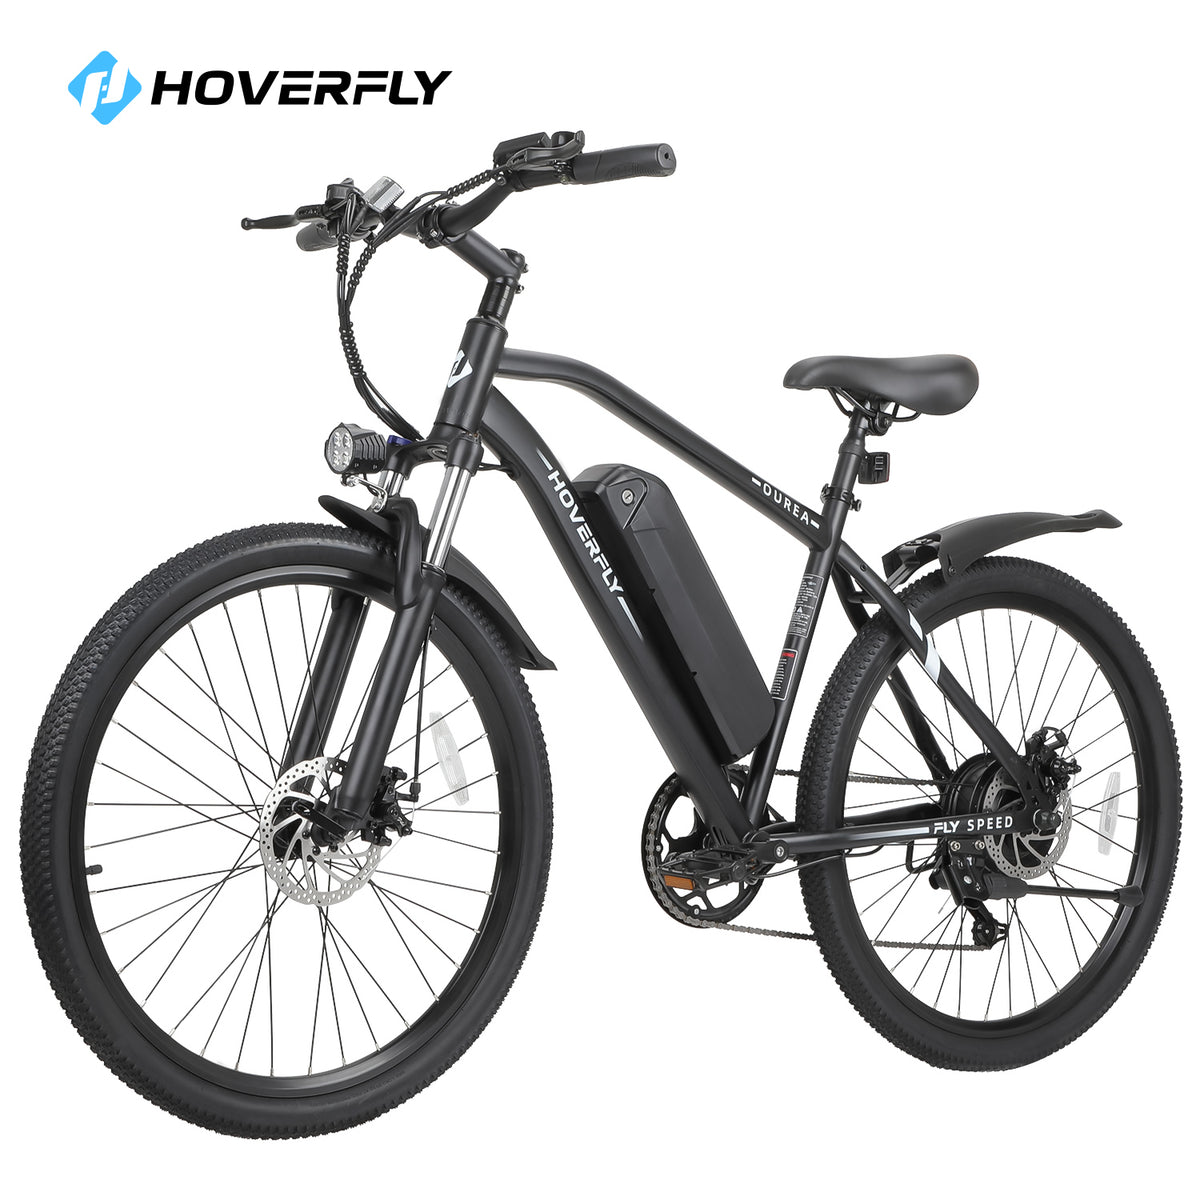 Hoverfly Ourea Commuter Electric Bike in Sophisticated Black, Showcasing Its Sleek Design and Powerful 500W Motor. Perfect for Commuting and Adventure, This Electric Bike Offers Unparalleled Versatility and Style.